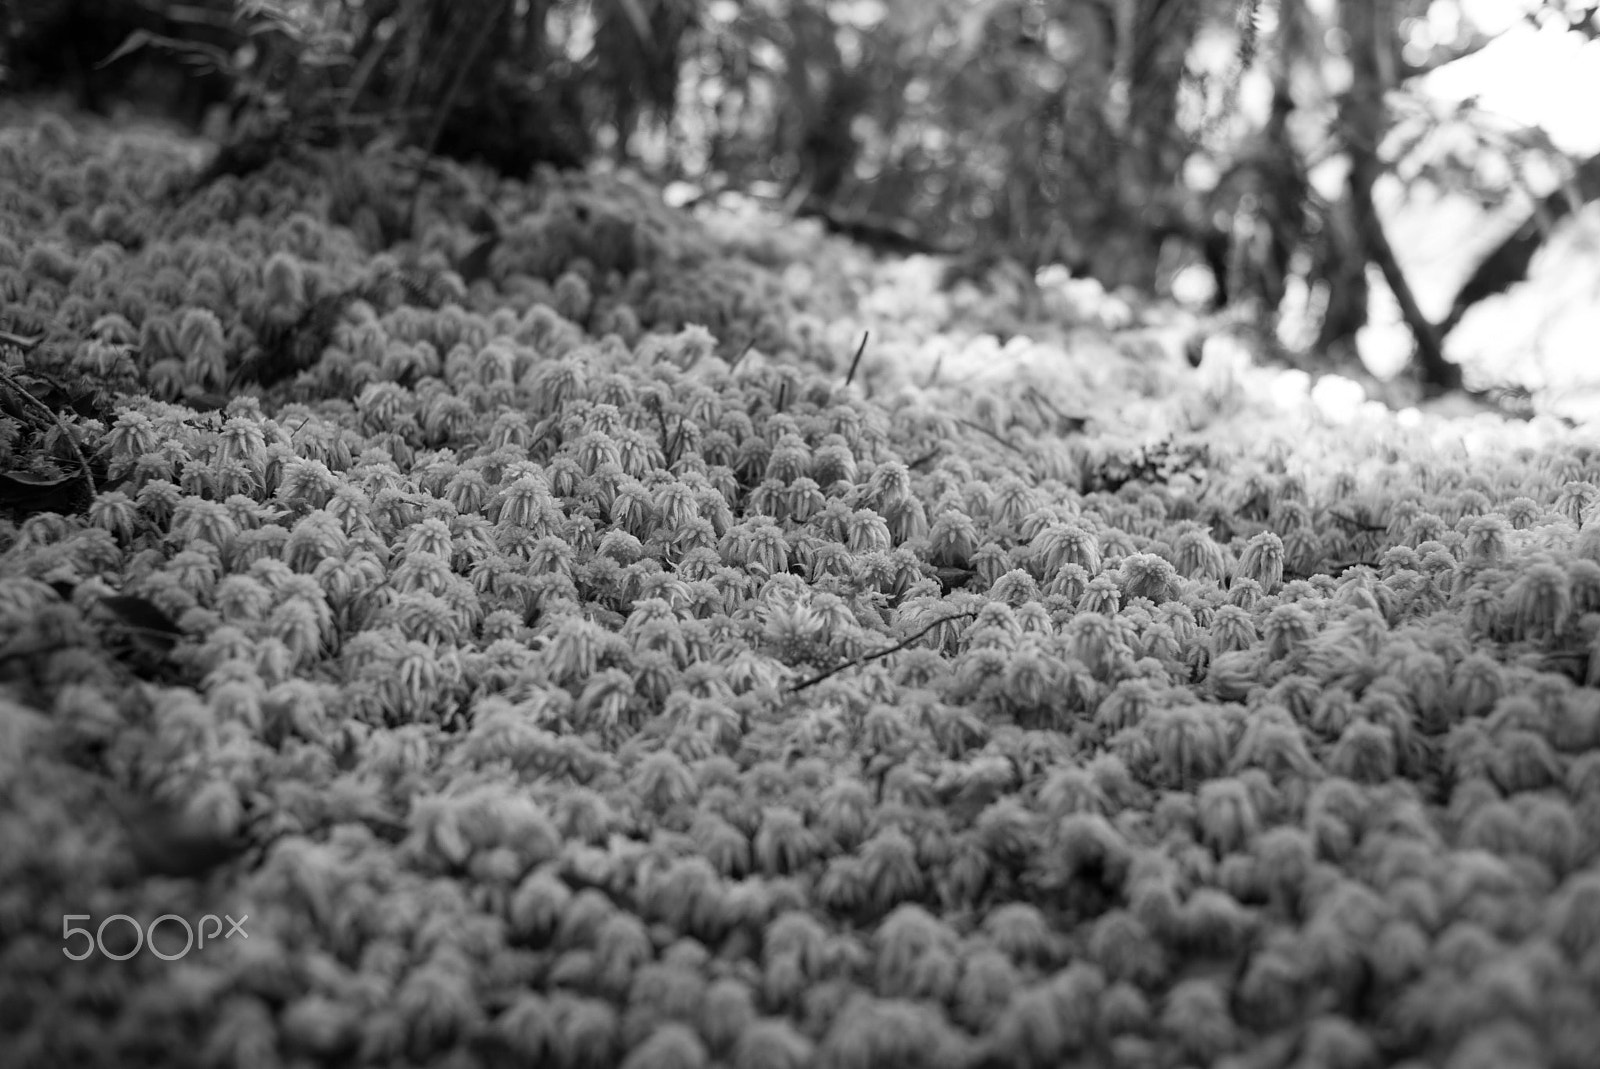 Leica M (Typ 240) + Summicron-M 1:2/35 ASPH. sample photo. Bed of moss under the trees at lake matheson, new zealand - december 2016 photography